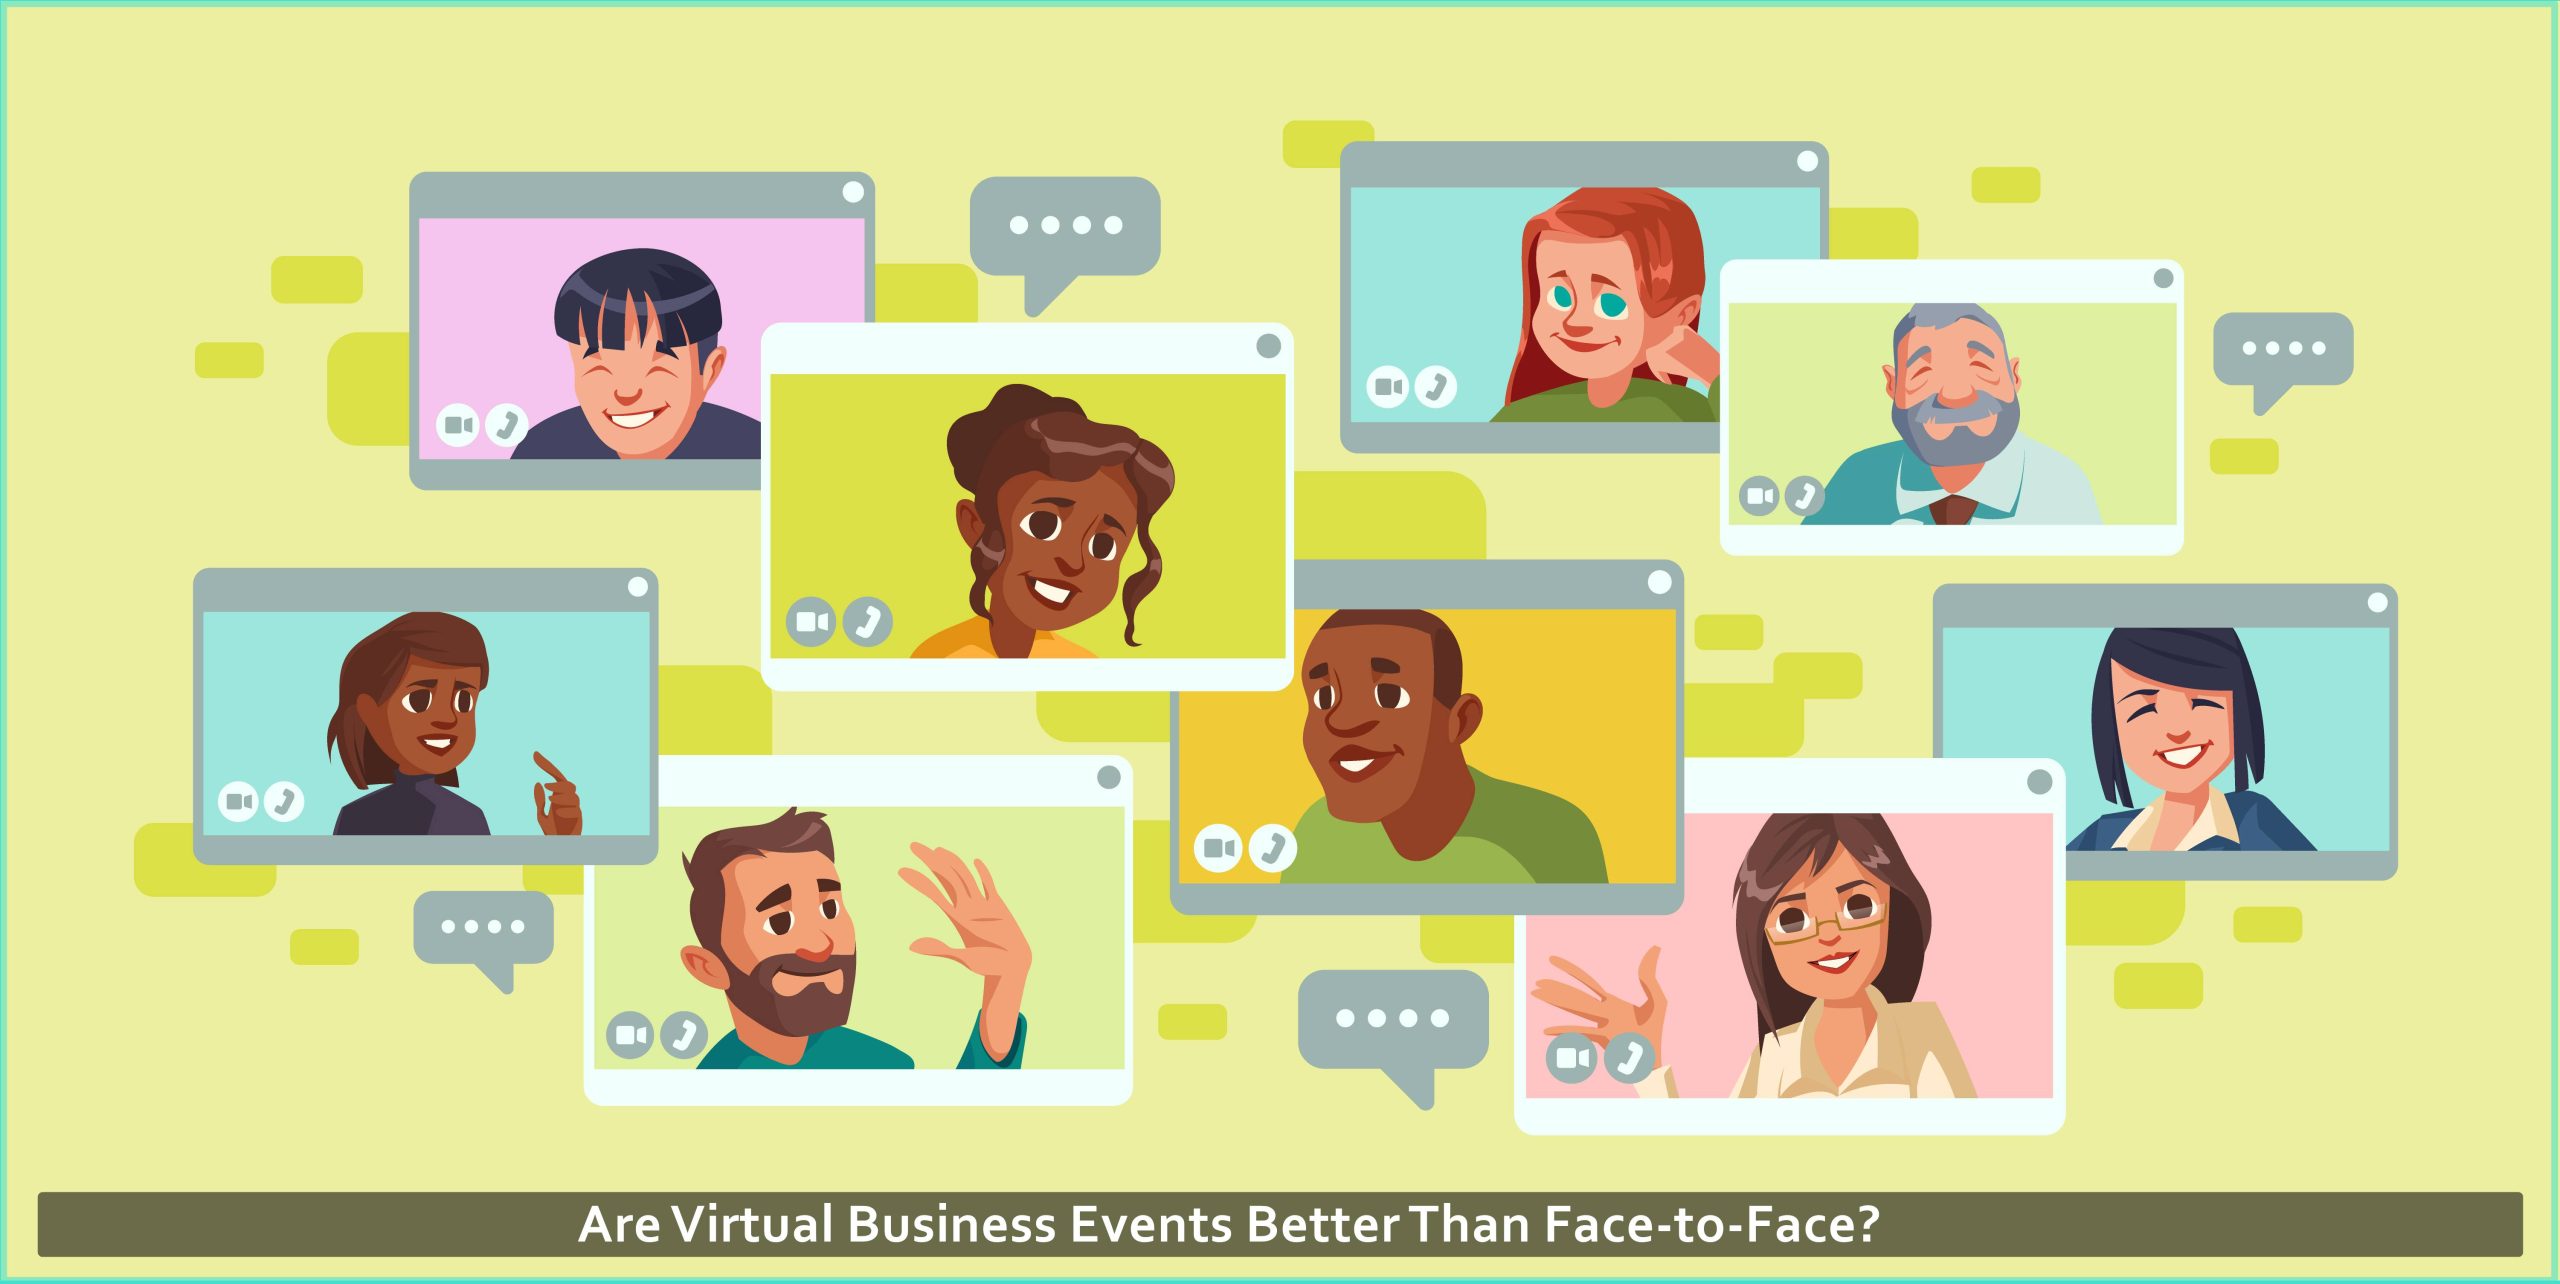 Are Virtual Business Events Better Than Face-to-Face?